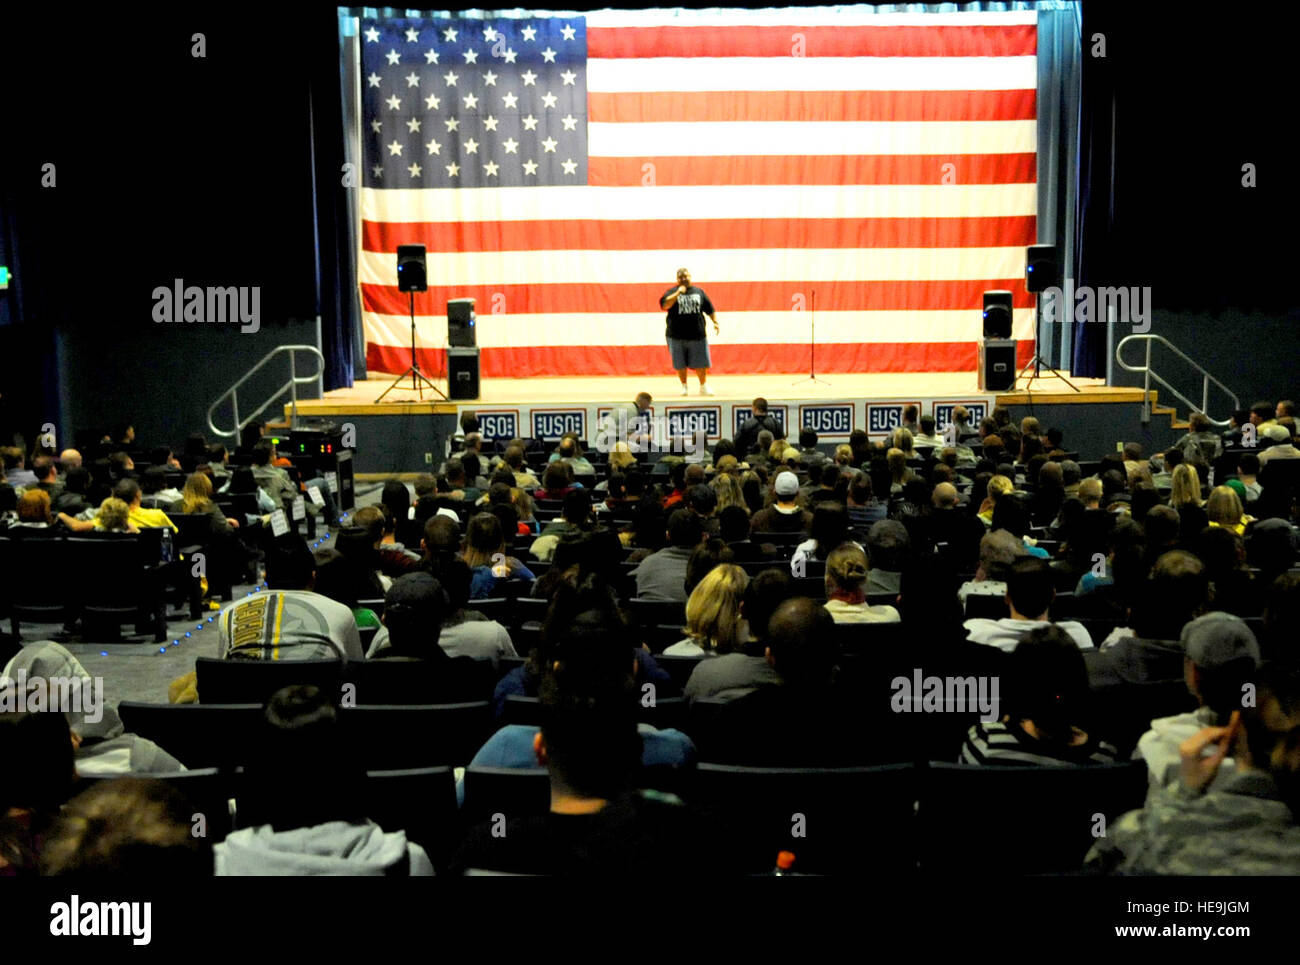 Comedian Gabriel Iglesias performs in front of a crowd at Eielson Air Force Base, Alaska, Nov. 10, 2008. Iglesias is on an eight-day USO tour with Vice Chairman of the Joint Chiefs of Staff U.S. Marine Gen. James E. Cartwright.  Air Force Master Sgt. Adam M. Stump. (Released) Stock Photo